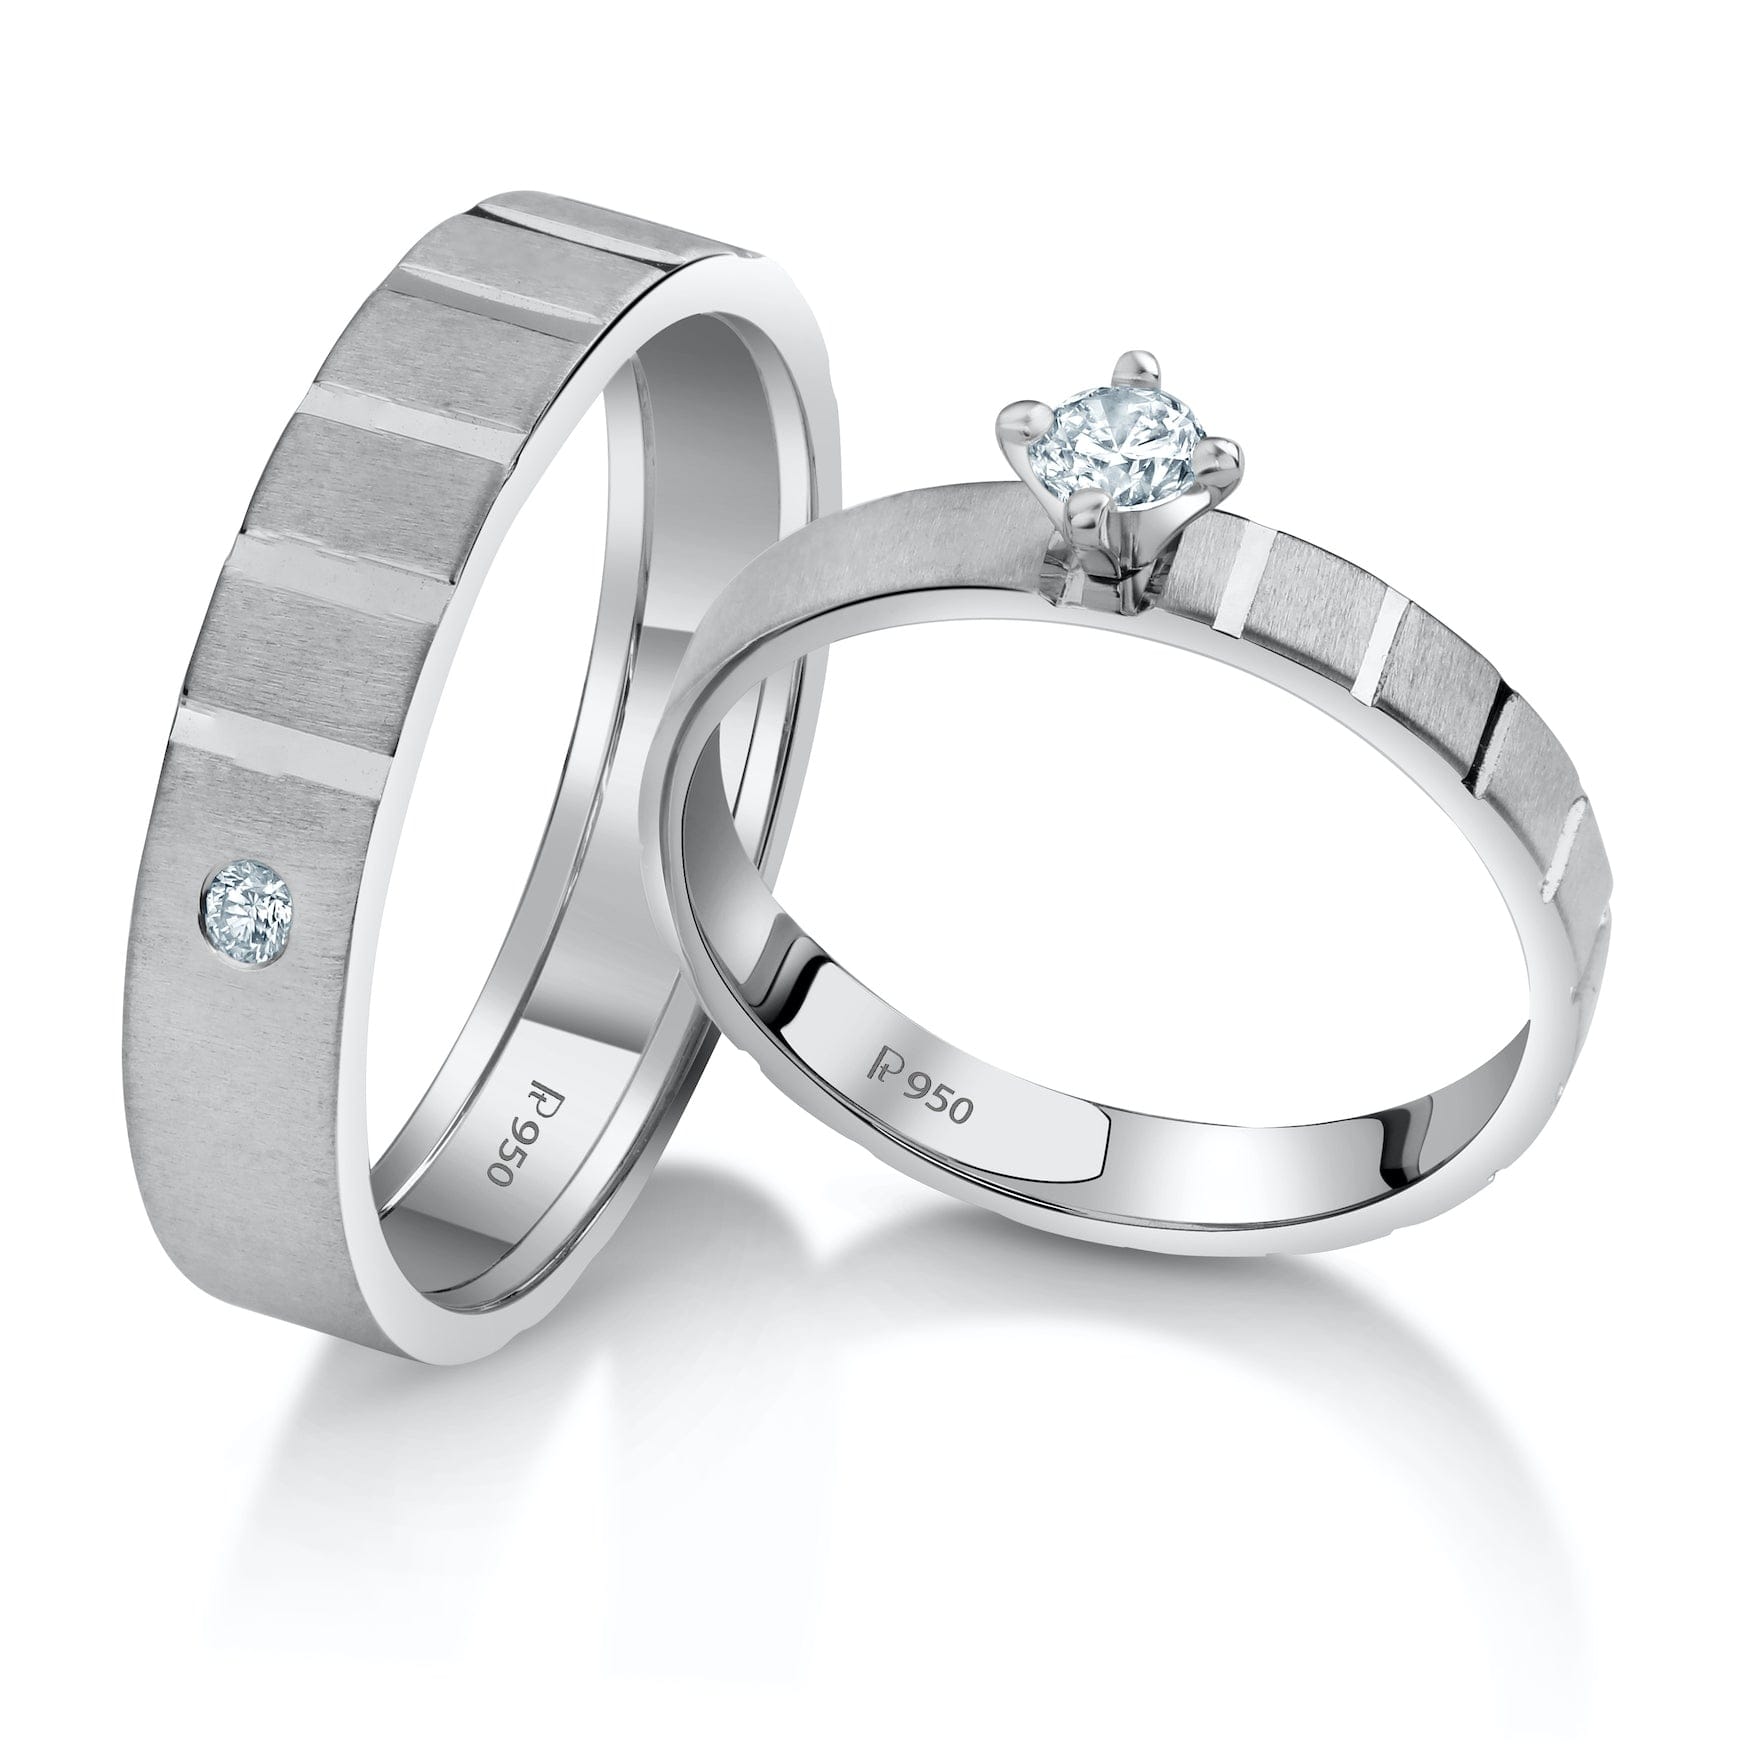 Classy Platinum Rings for Couples to Steal the Show | Cool wedding rings, Couple  rings, Rings